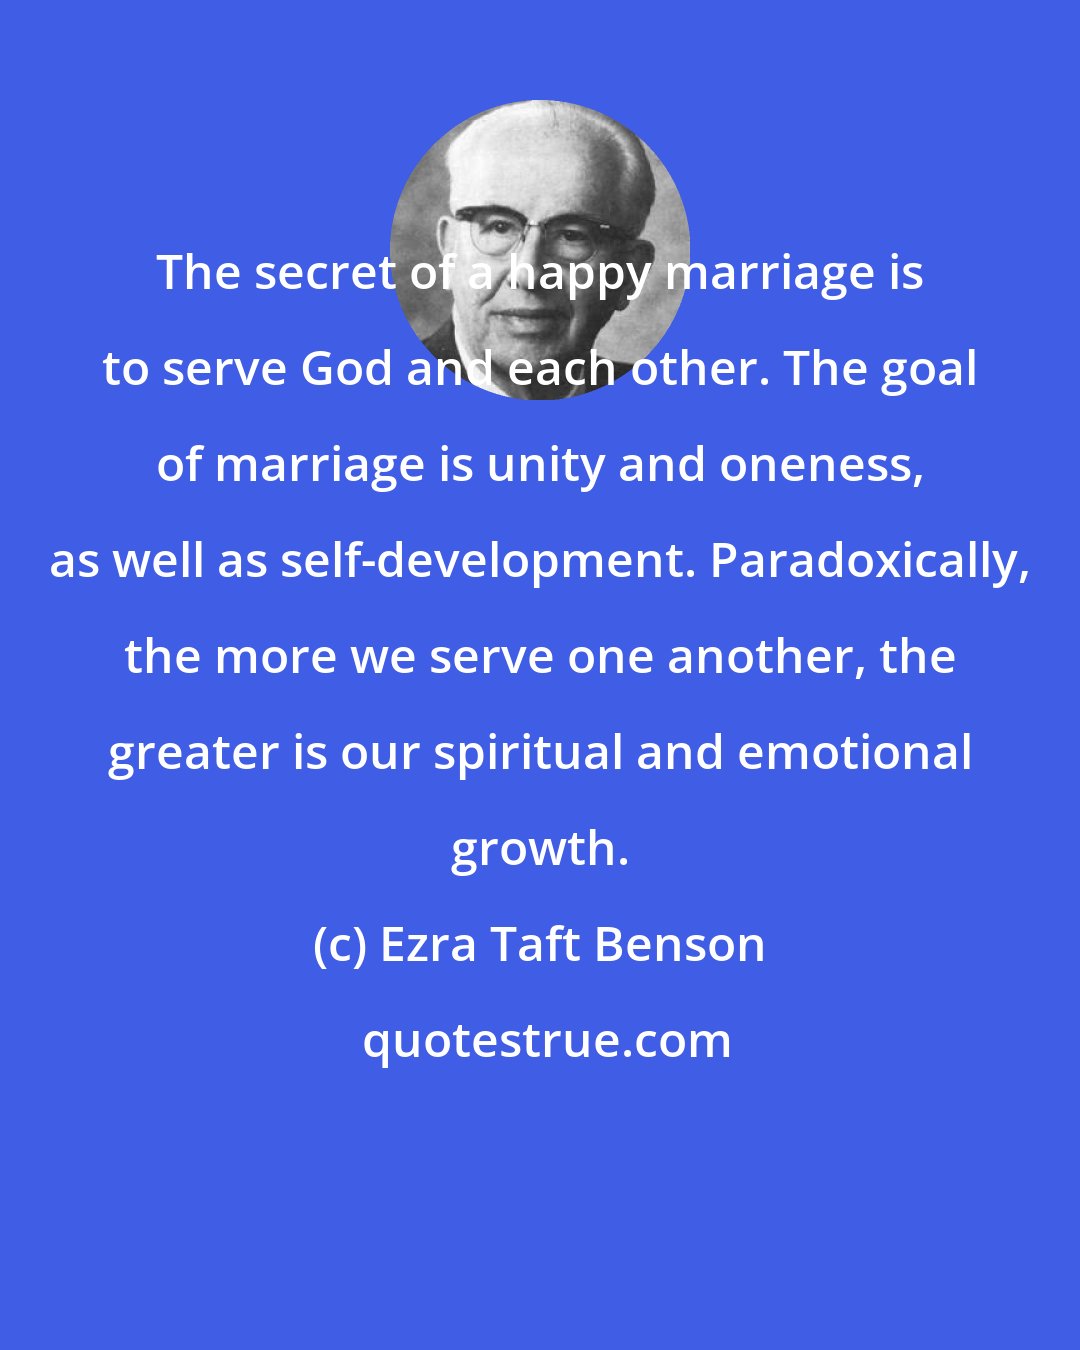 Ezra Taft Benson: The secret of a happy marriage is to serve God and each other. The goal of marriage is unity and oneness, as well as self-development. Paradoxically, the more we serve one another, the greater is our spiritual and emotional growth.